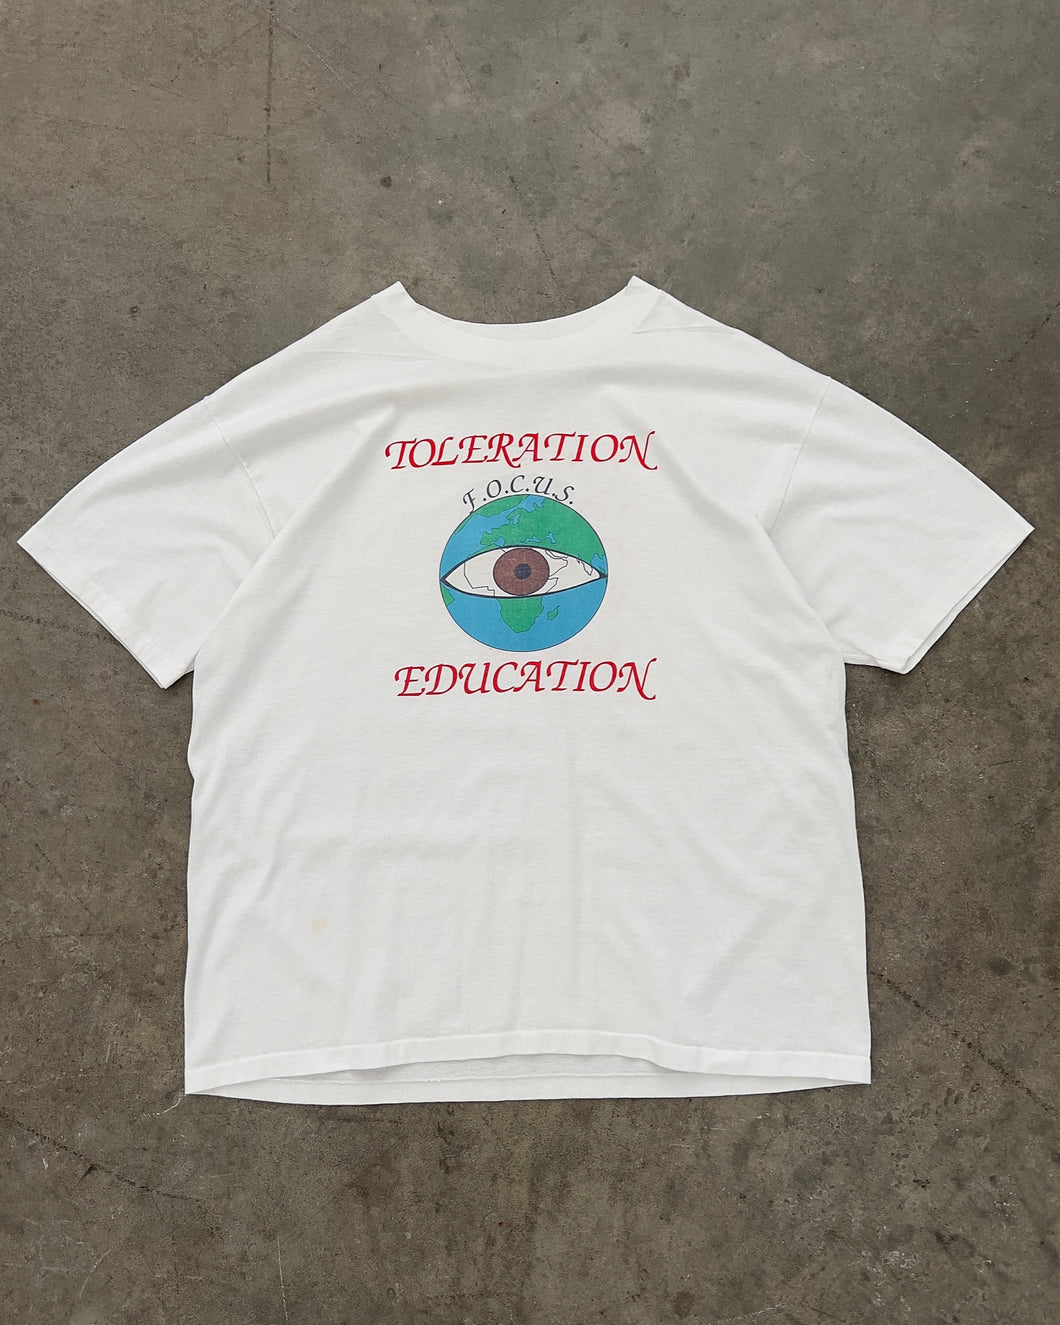 SINGLE STITCHED “TOLERATION EDUCATION” TEE - 1990S